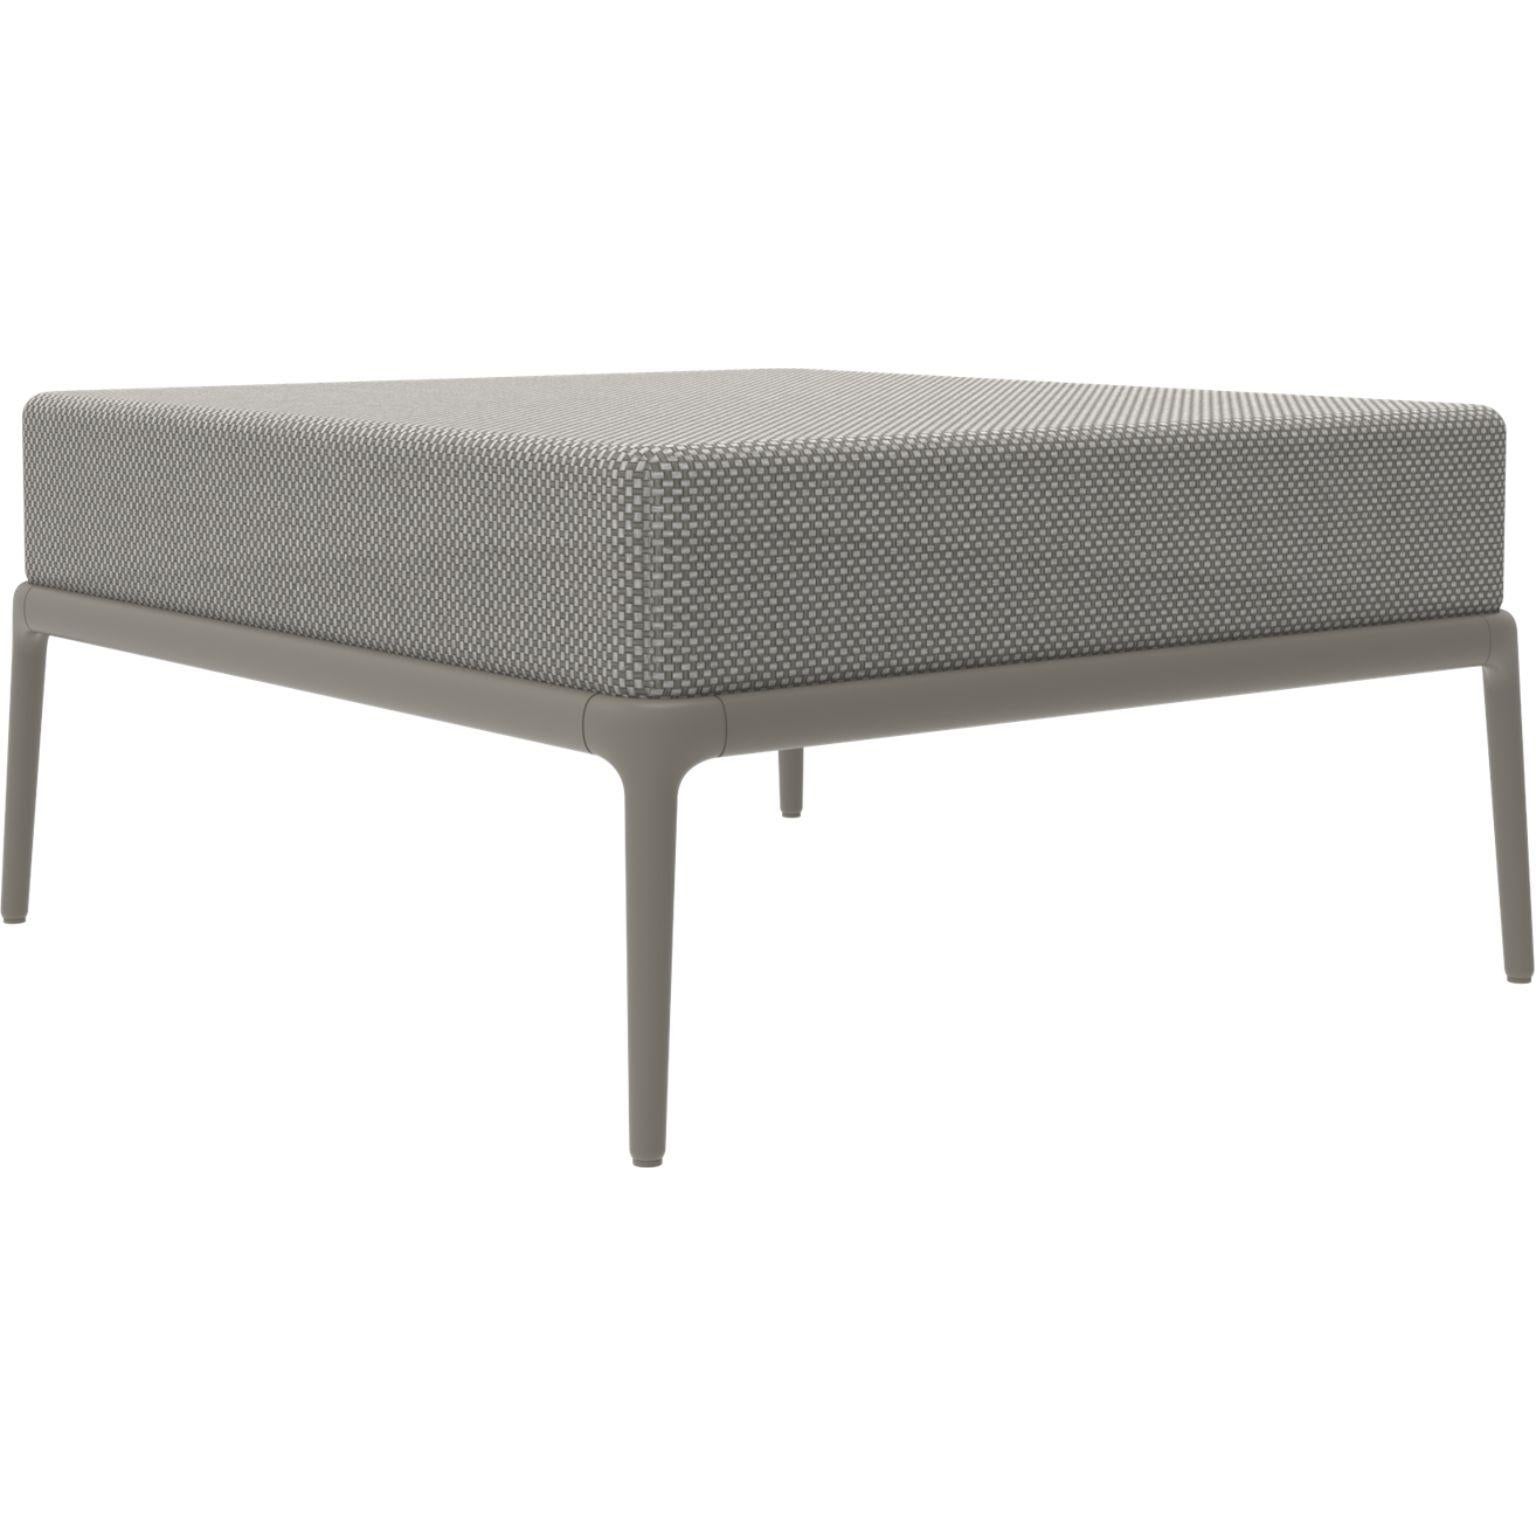 Post-Modern Xaloc Grey Chaise Longue by Mowee For Sale